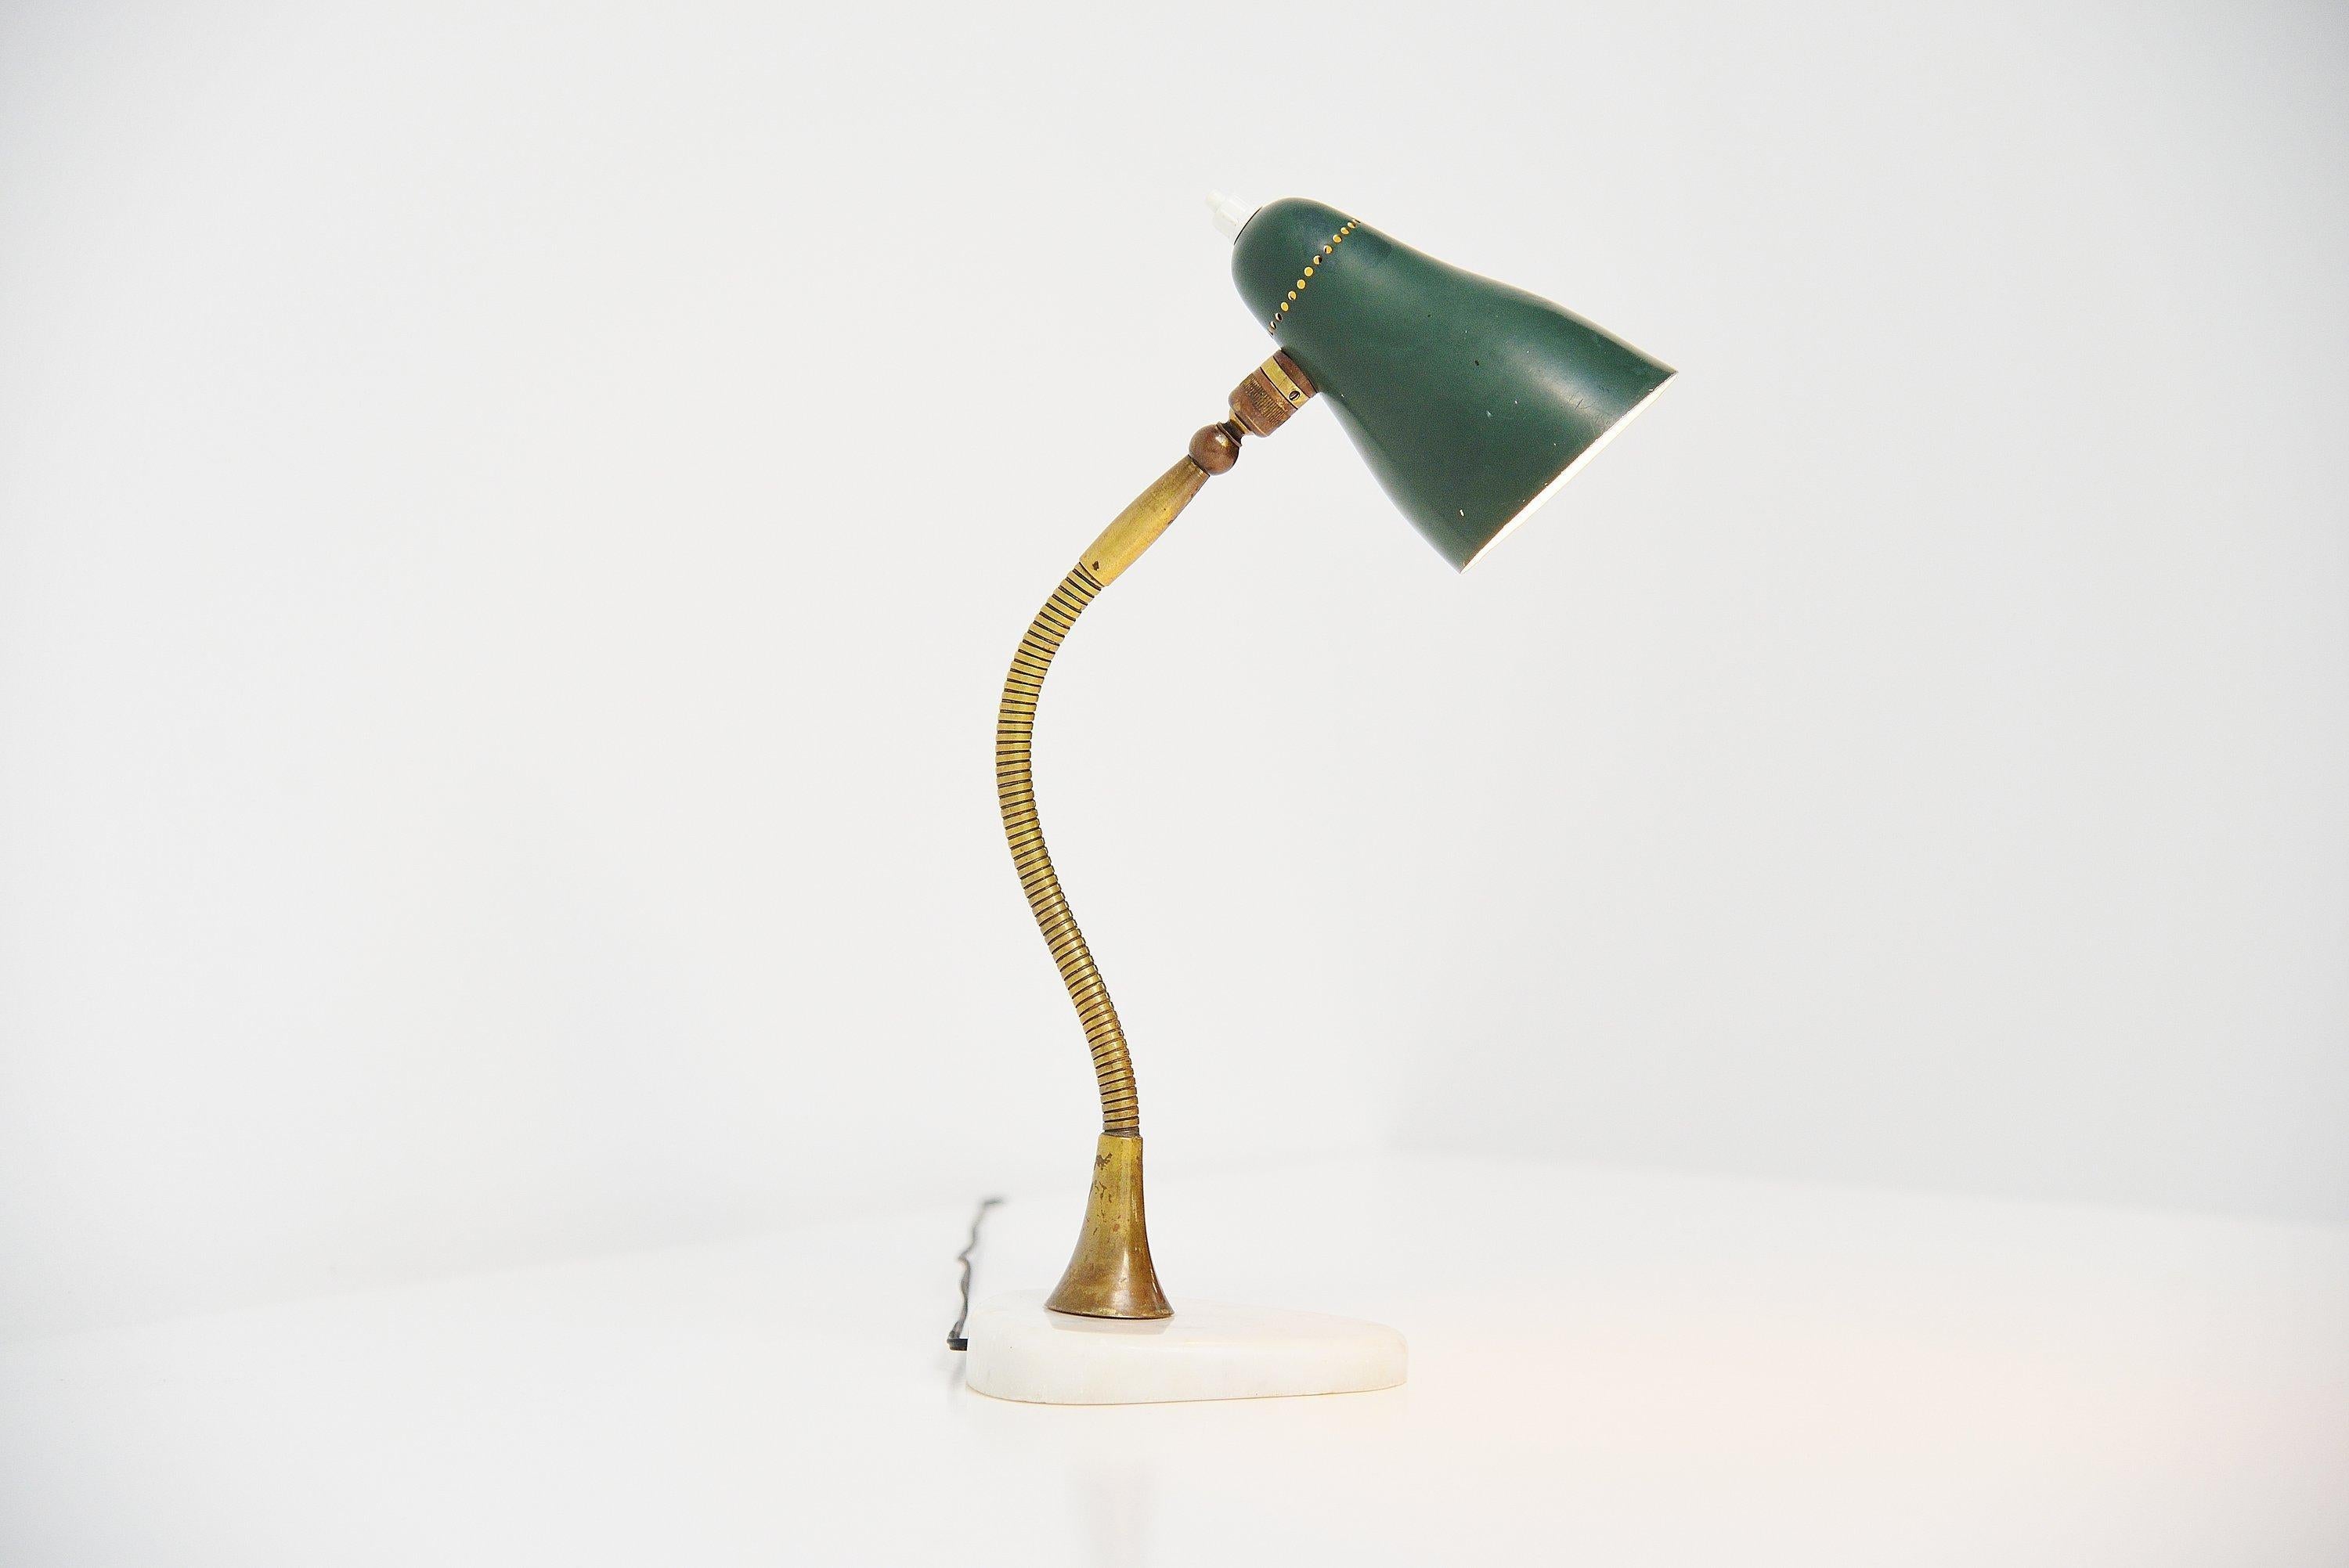 Nice adjustable small table lamp attributed to Giusepp Ostuni and manufactured by Oluce, Italy 1955. The table lamp has a very nice shaped marble base which has a small chip to it. It has a brass bendable arm and a green aluminium shade with on/off